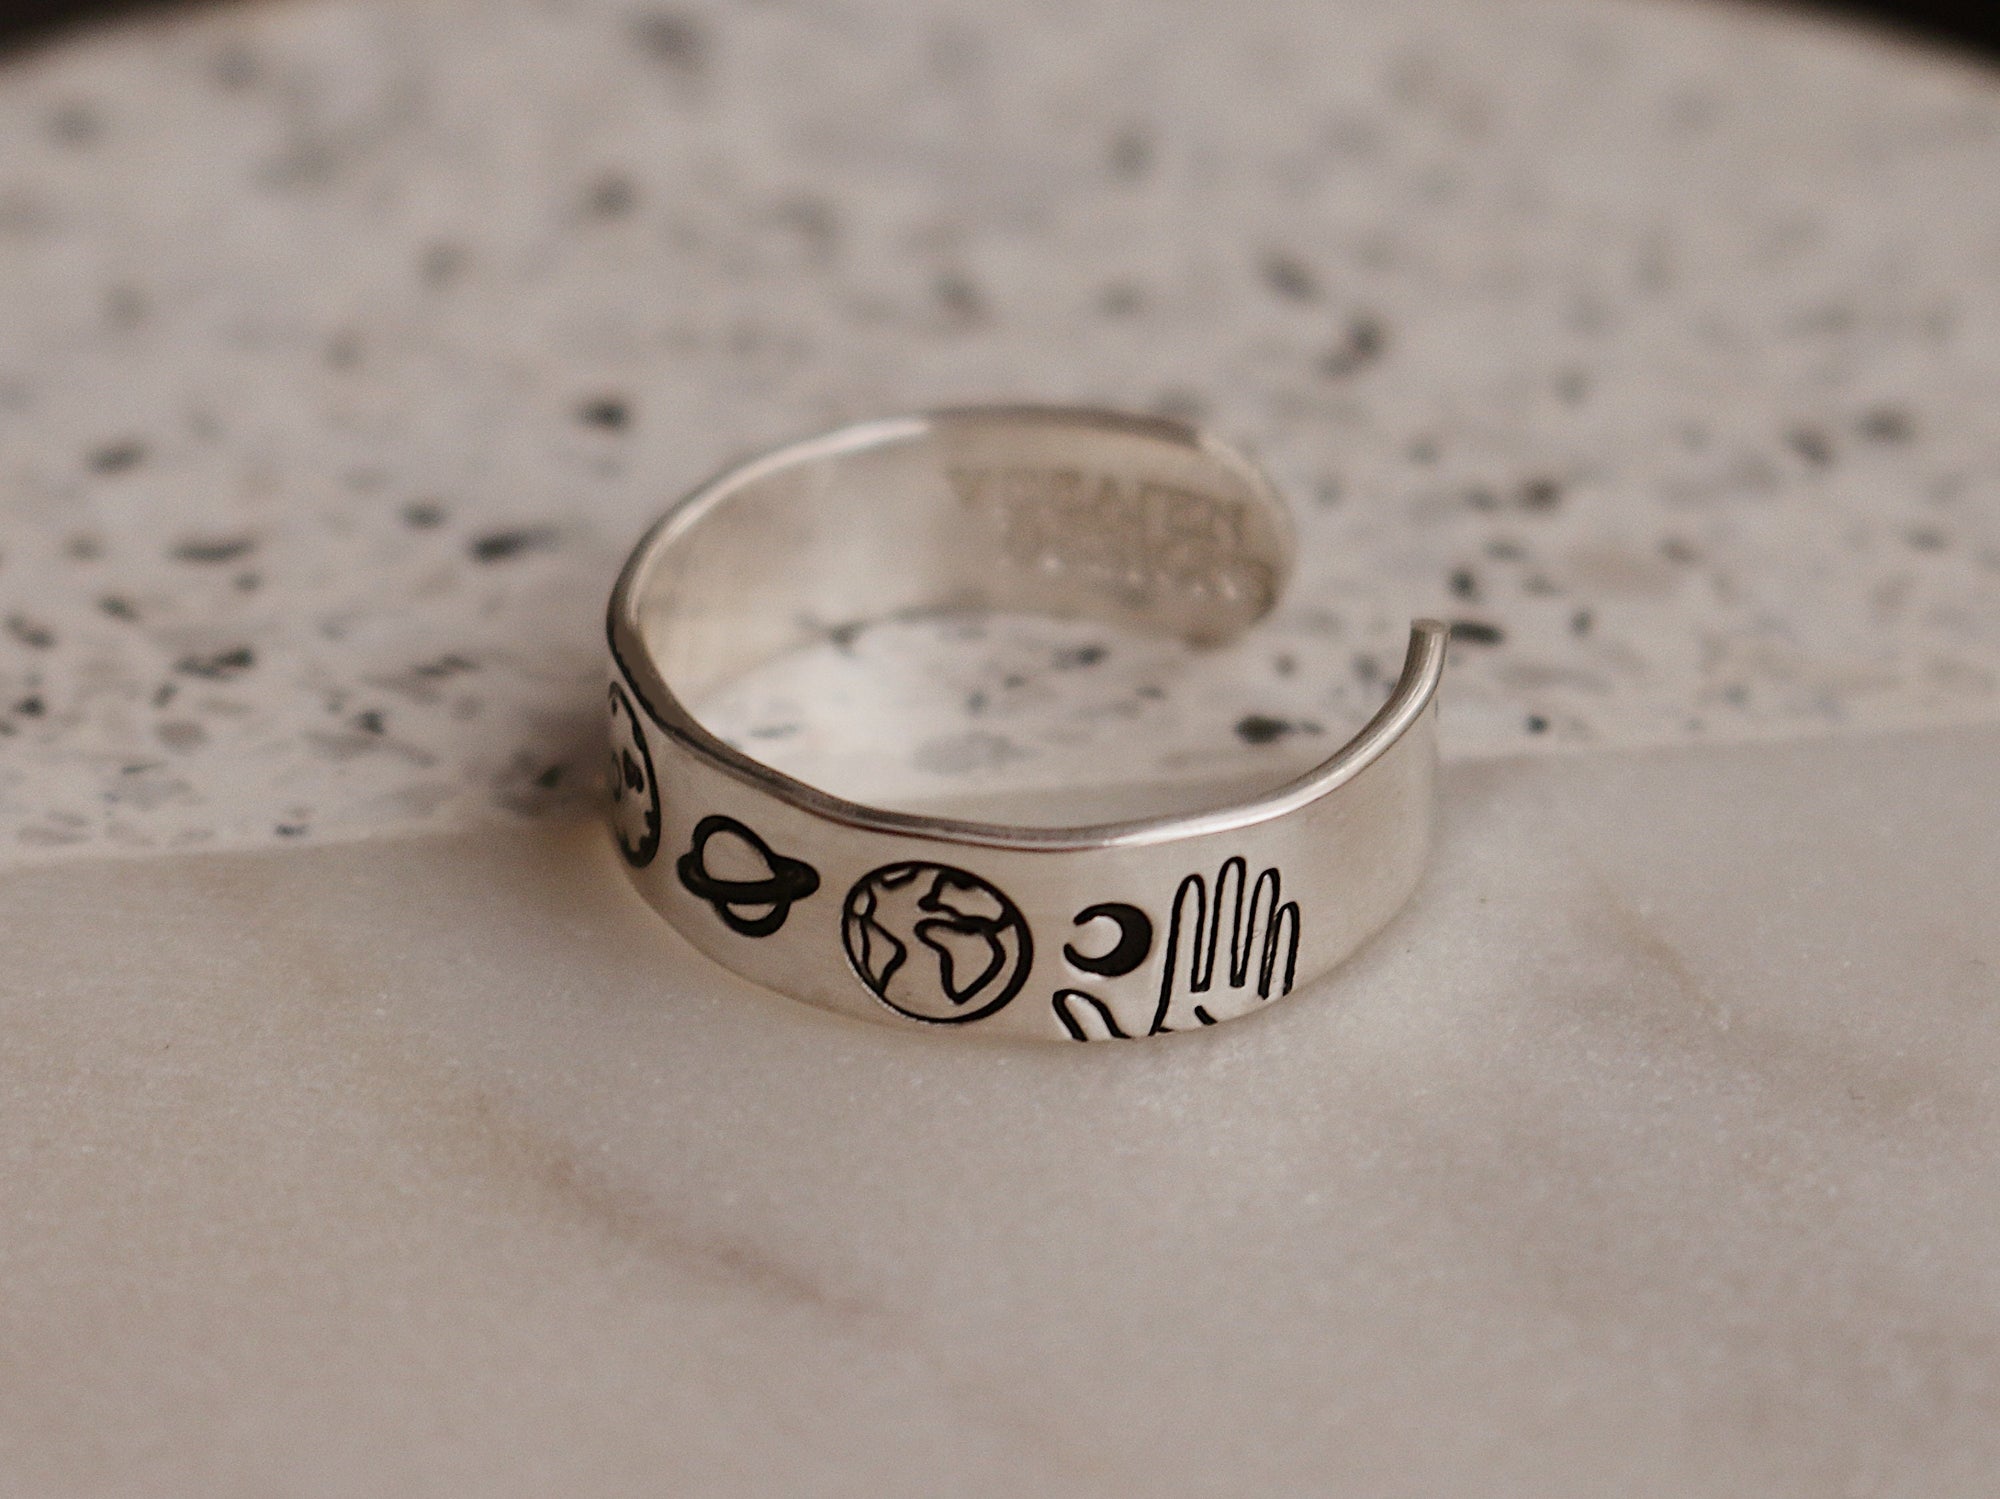 Solar System Ring | Planets Jewelry | Sun and Moon Ring | Best Friend Birthday Gift | Space Lover Jewelry | Celestial Ring | Astronomical